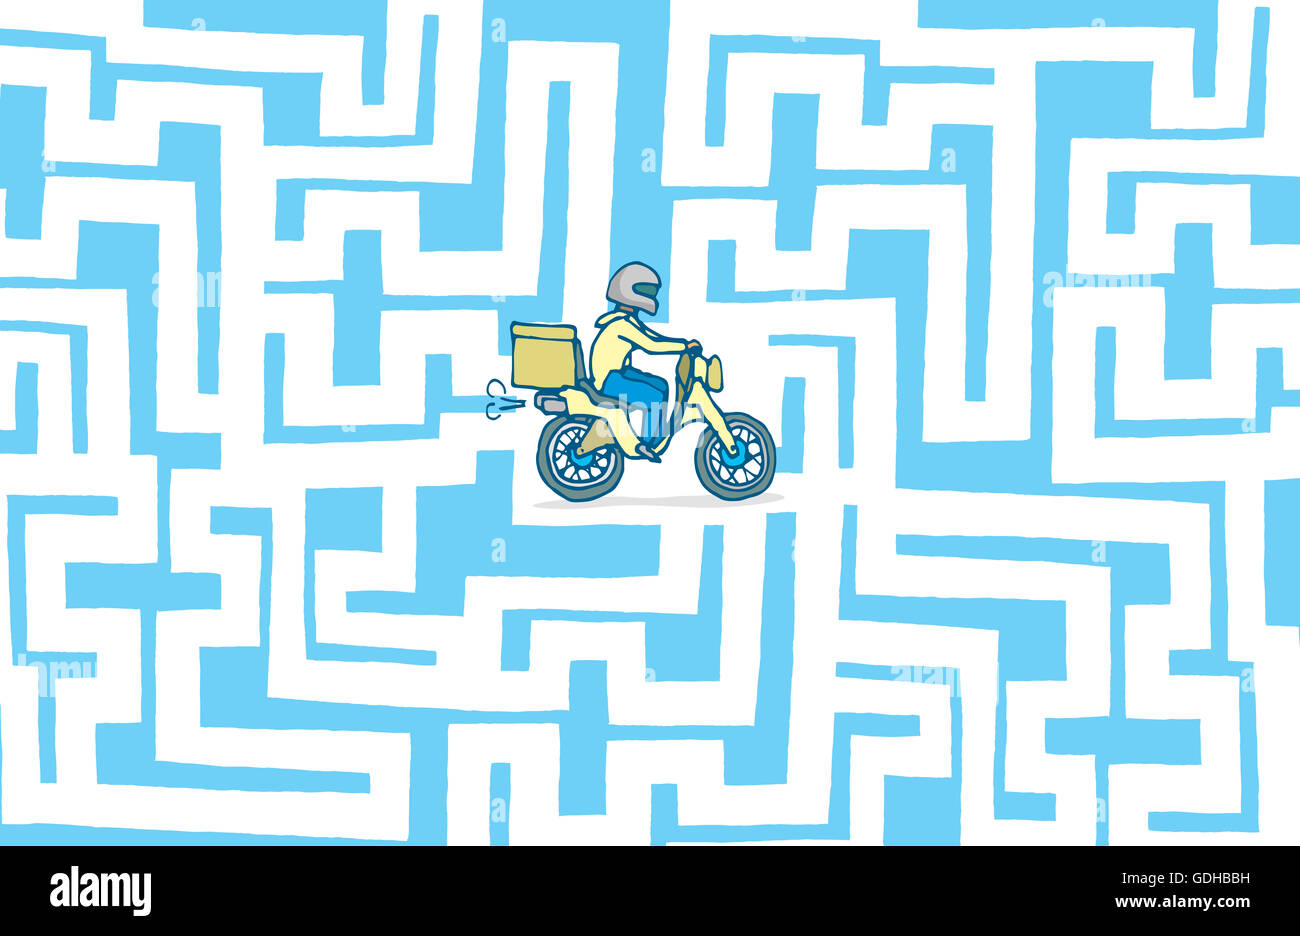 Cartoon illustration of lost delivery boy stranded in maze Stock Photo